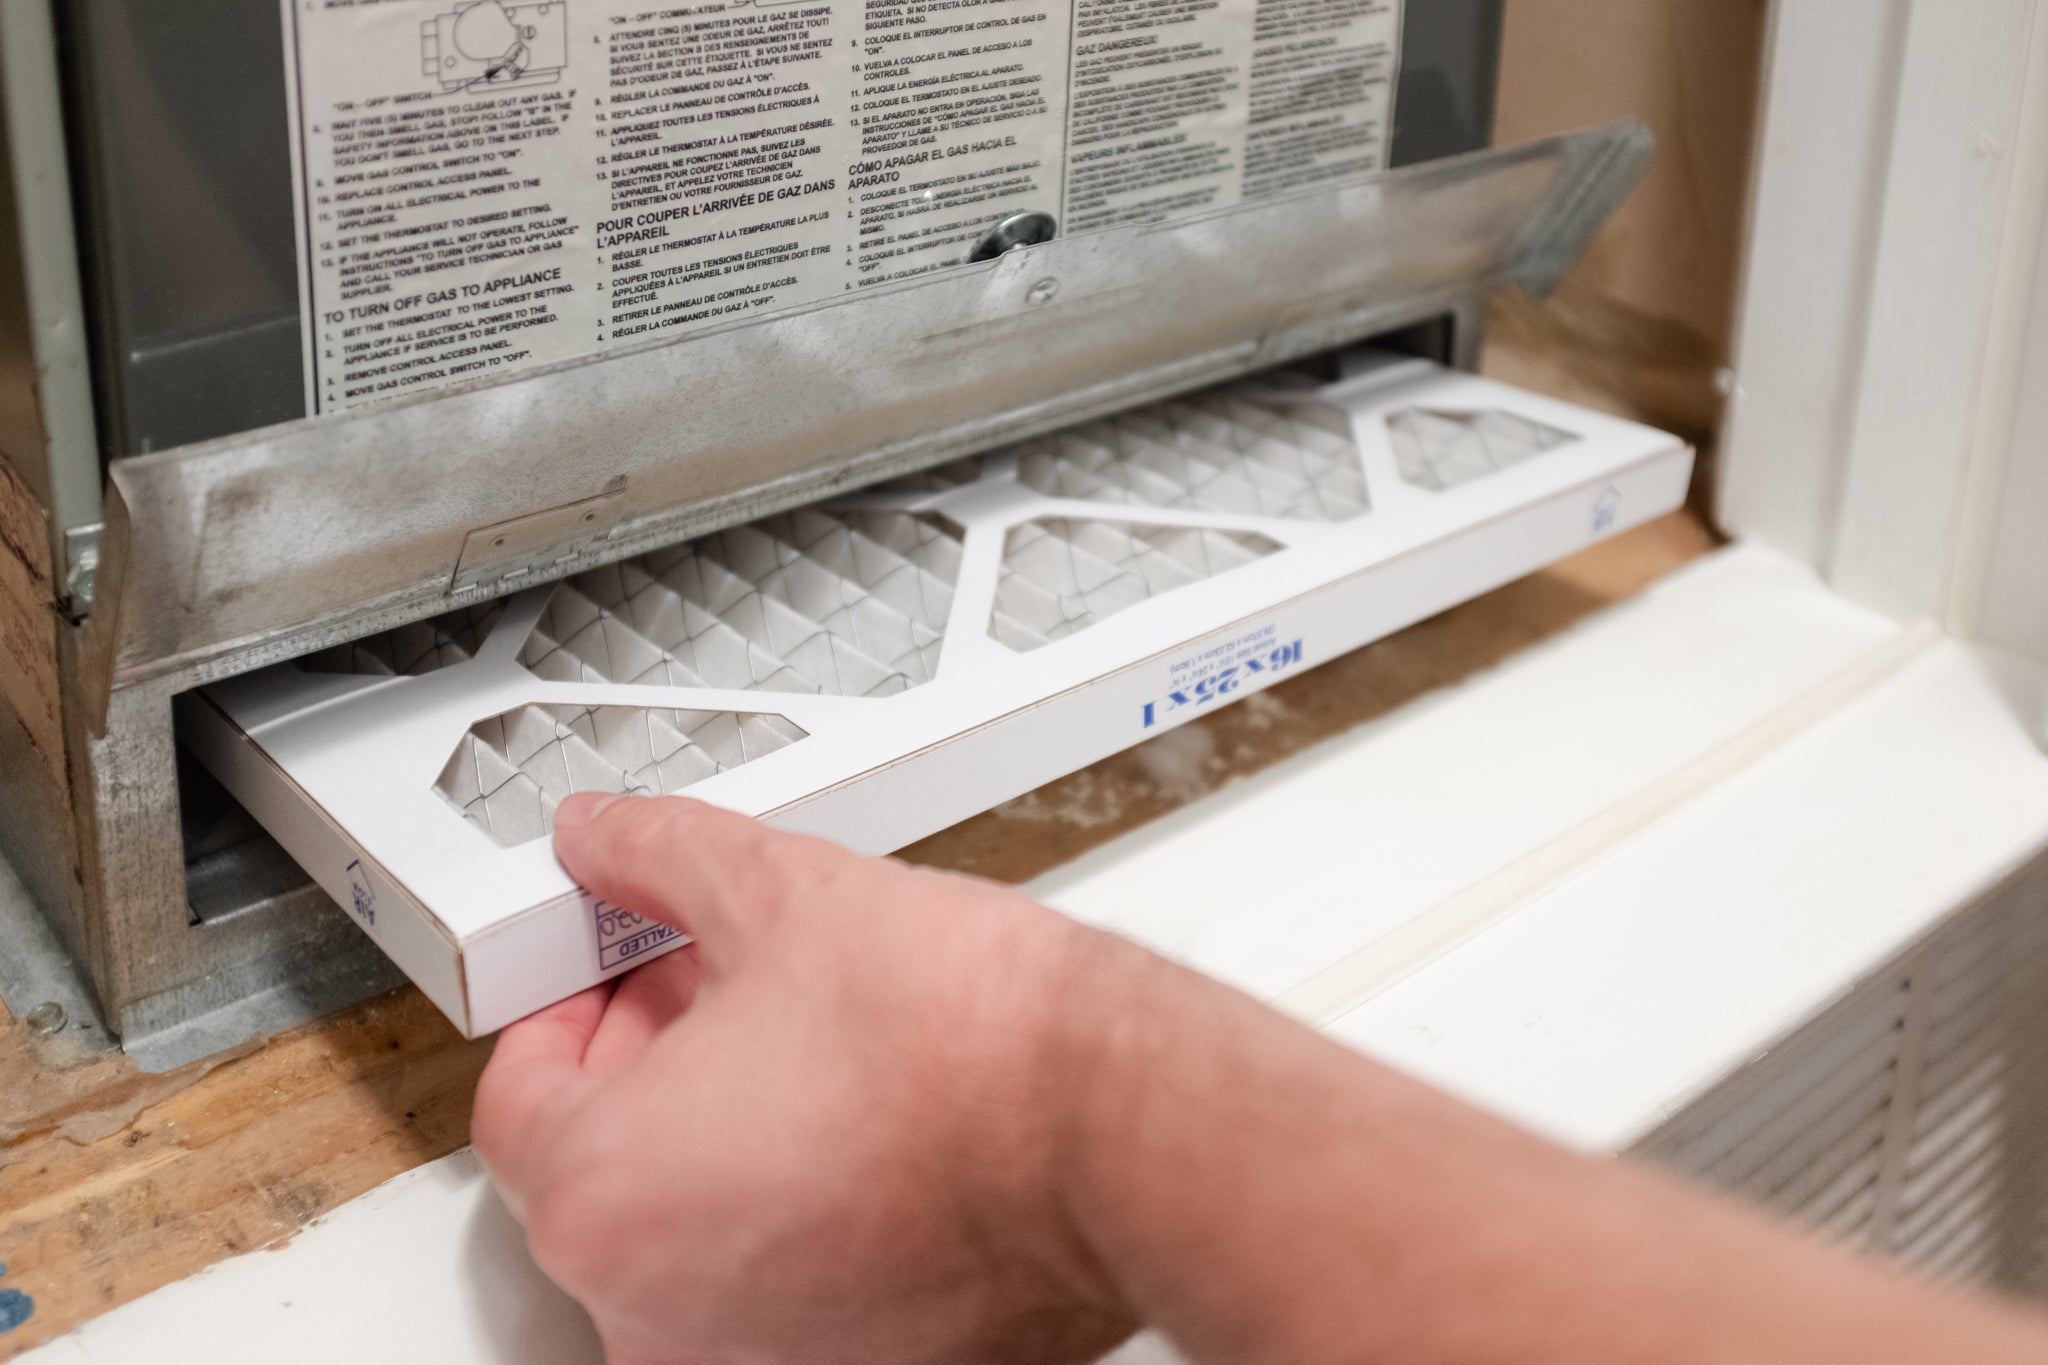 How To Put In An Air Conditioner Filter